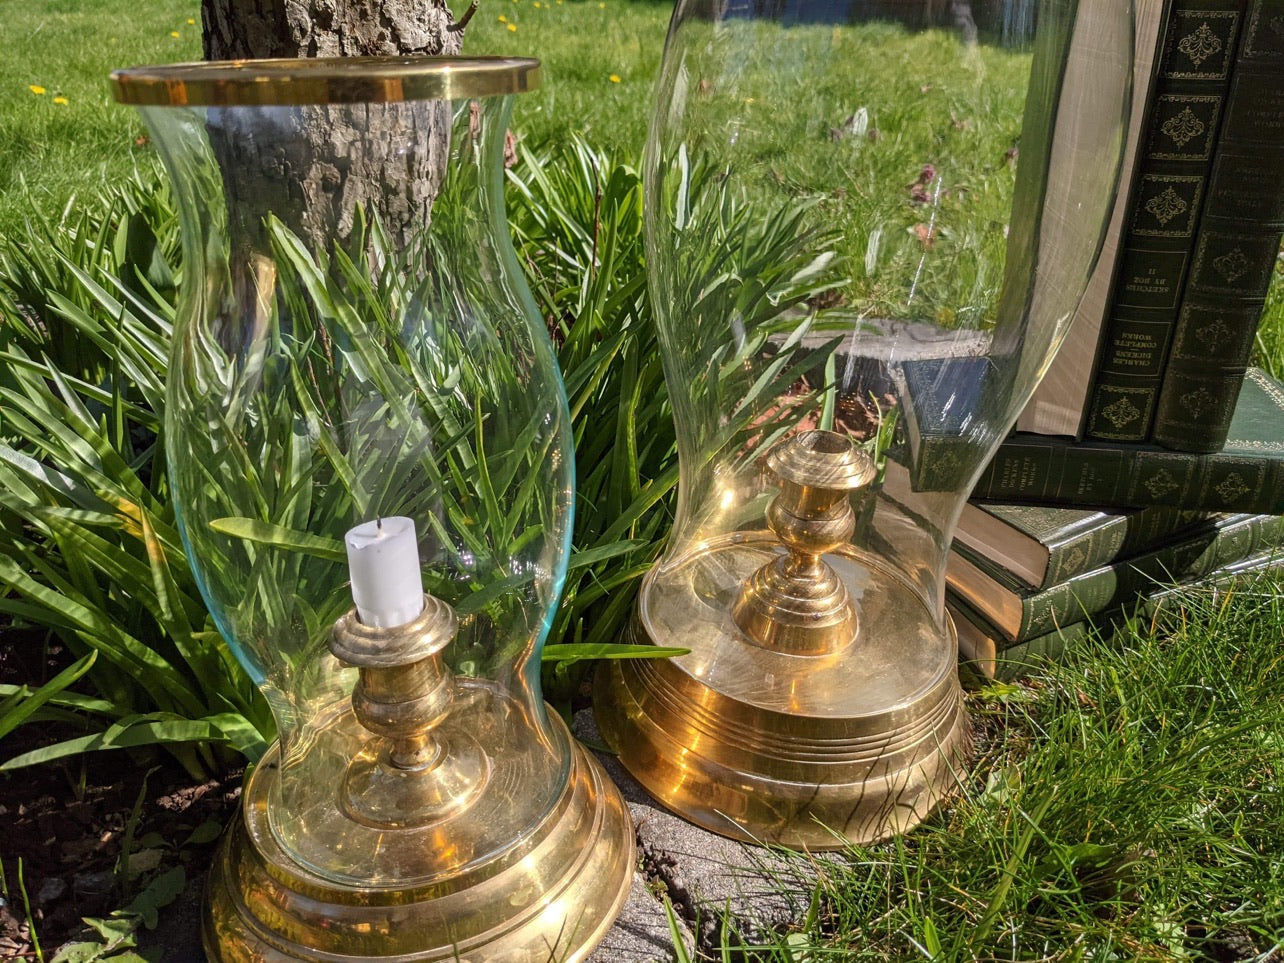 The Brass Candle Lanterns